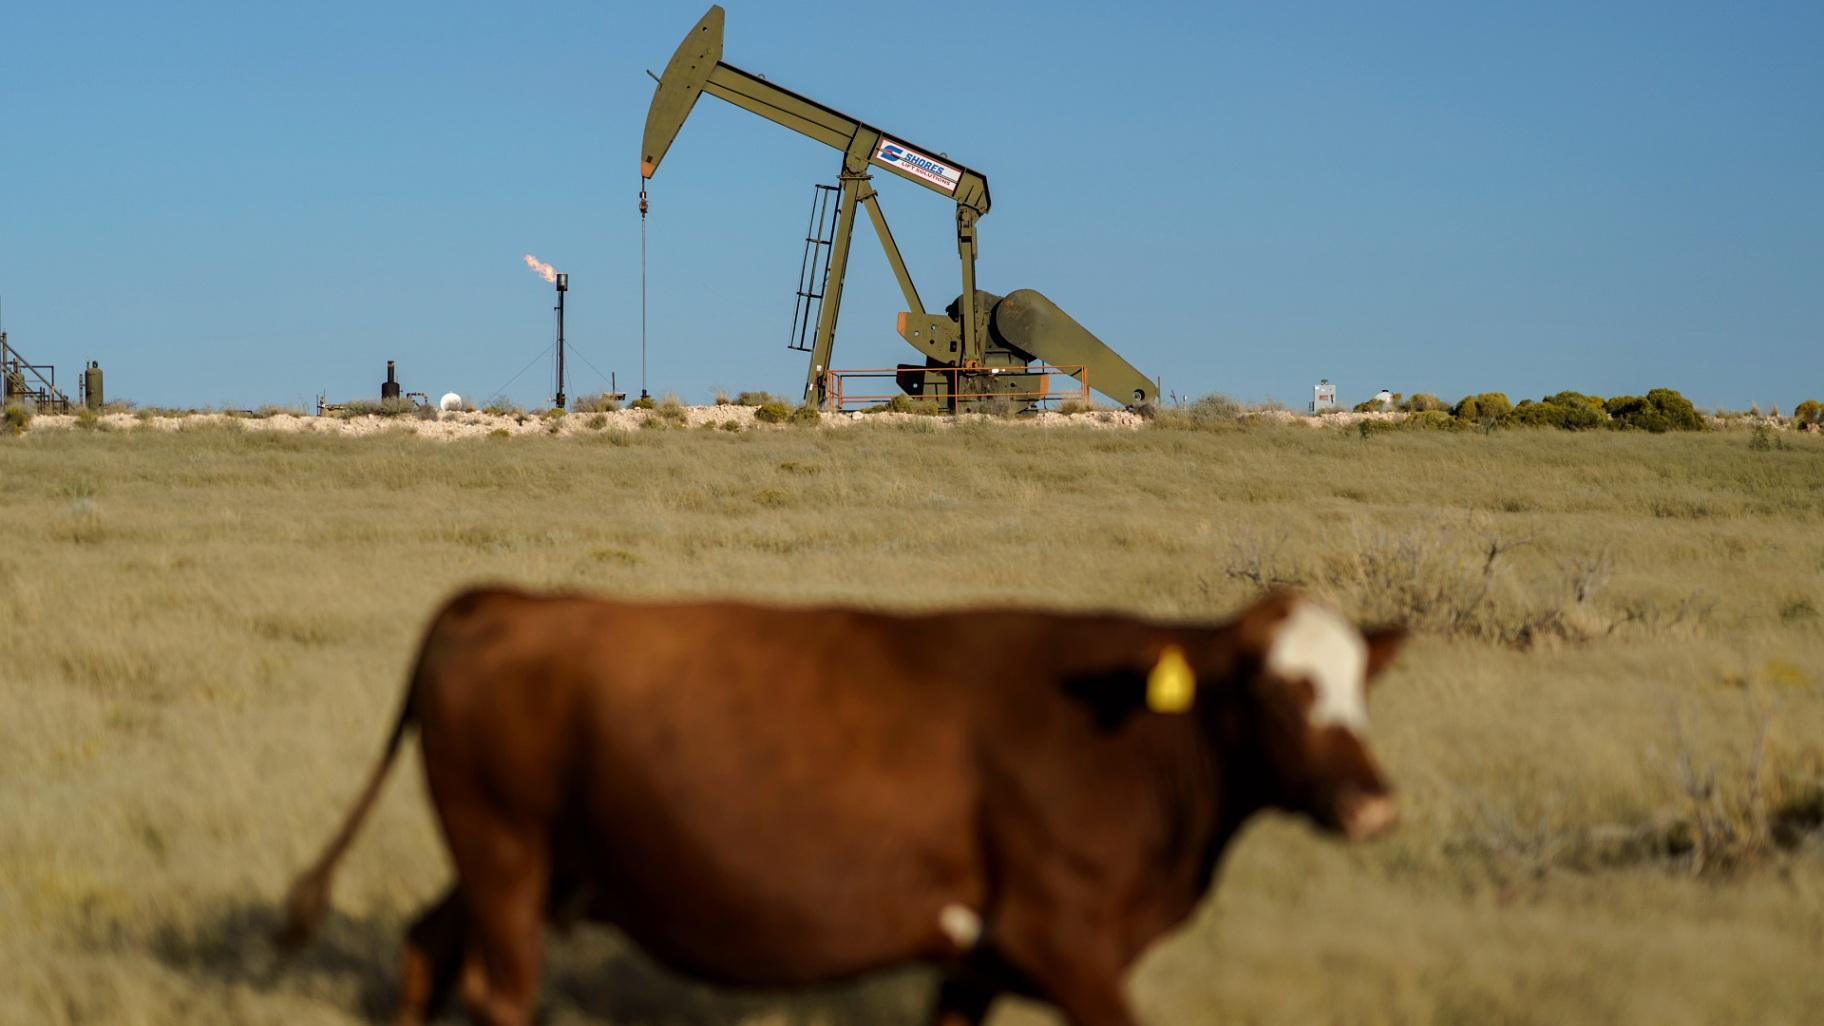 A cow walks through a field as an oil pumpjack and a flare burning off methane and other hydrocarbons stand in the background in the Permian Basin in Jal, N.M., Oct. 14, 2021. (AP Photo / David Goldman, File)